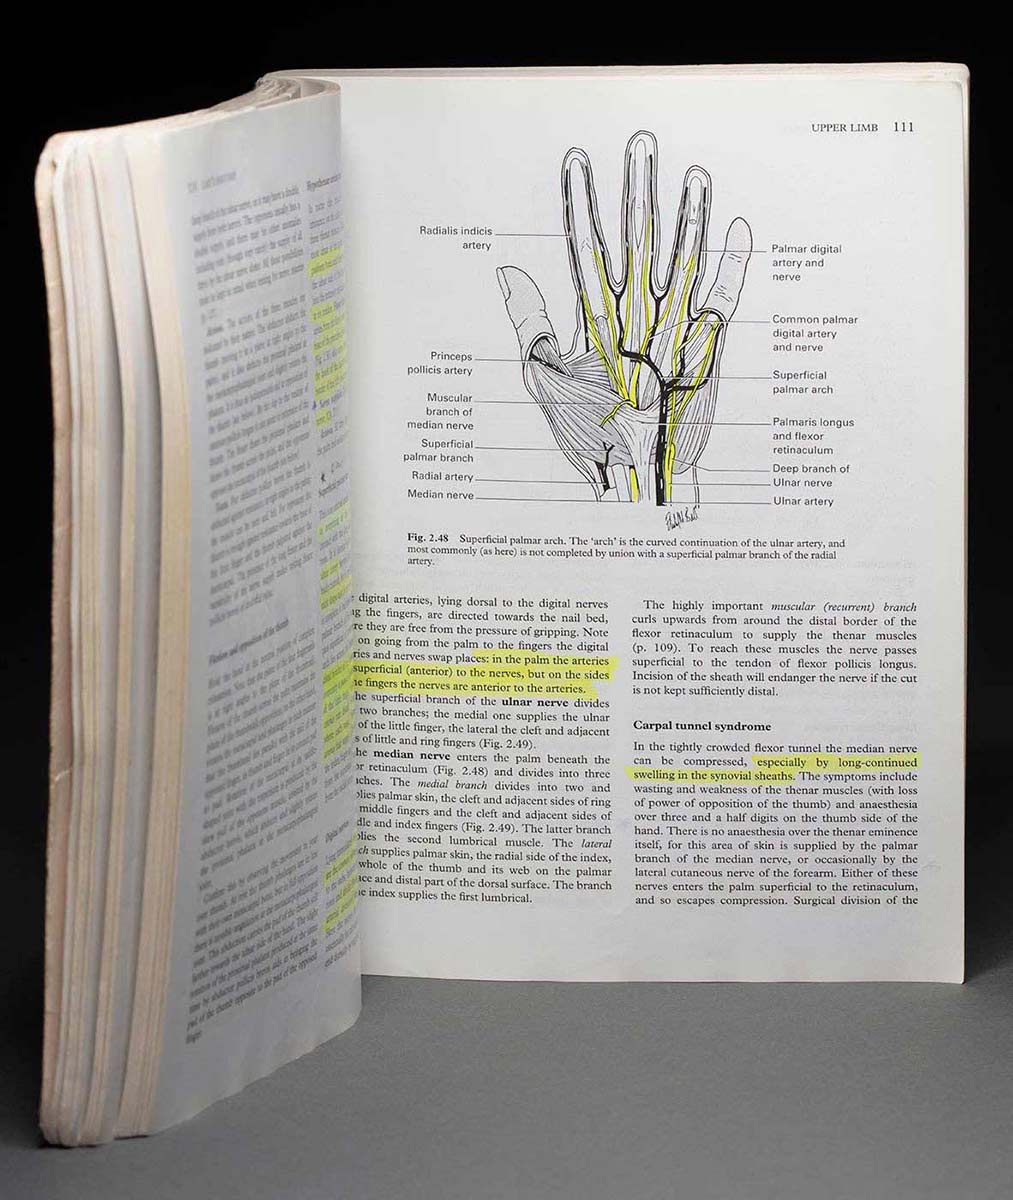 An opened book standing upright and parted to a page headed 'Upper Limb' with text (some highlighted in yellow) and a diagram of a hand labelled 'Superficial palmar arch'. The diagram shows nerves and arteries of the hand. - click to view larger image